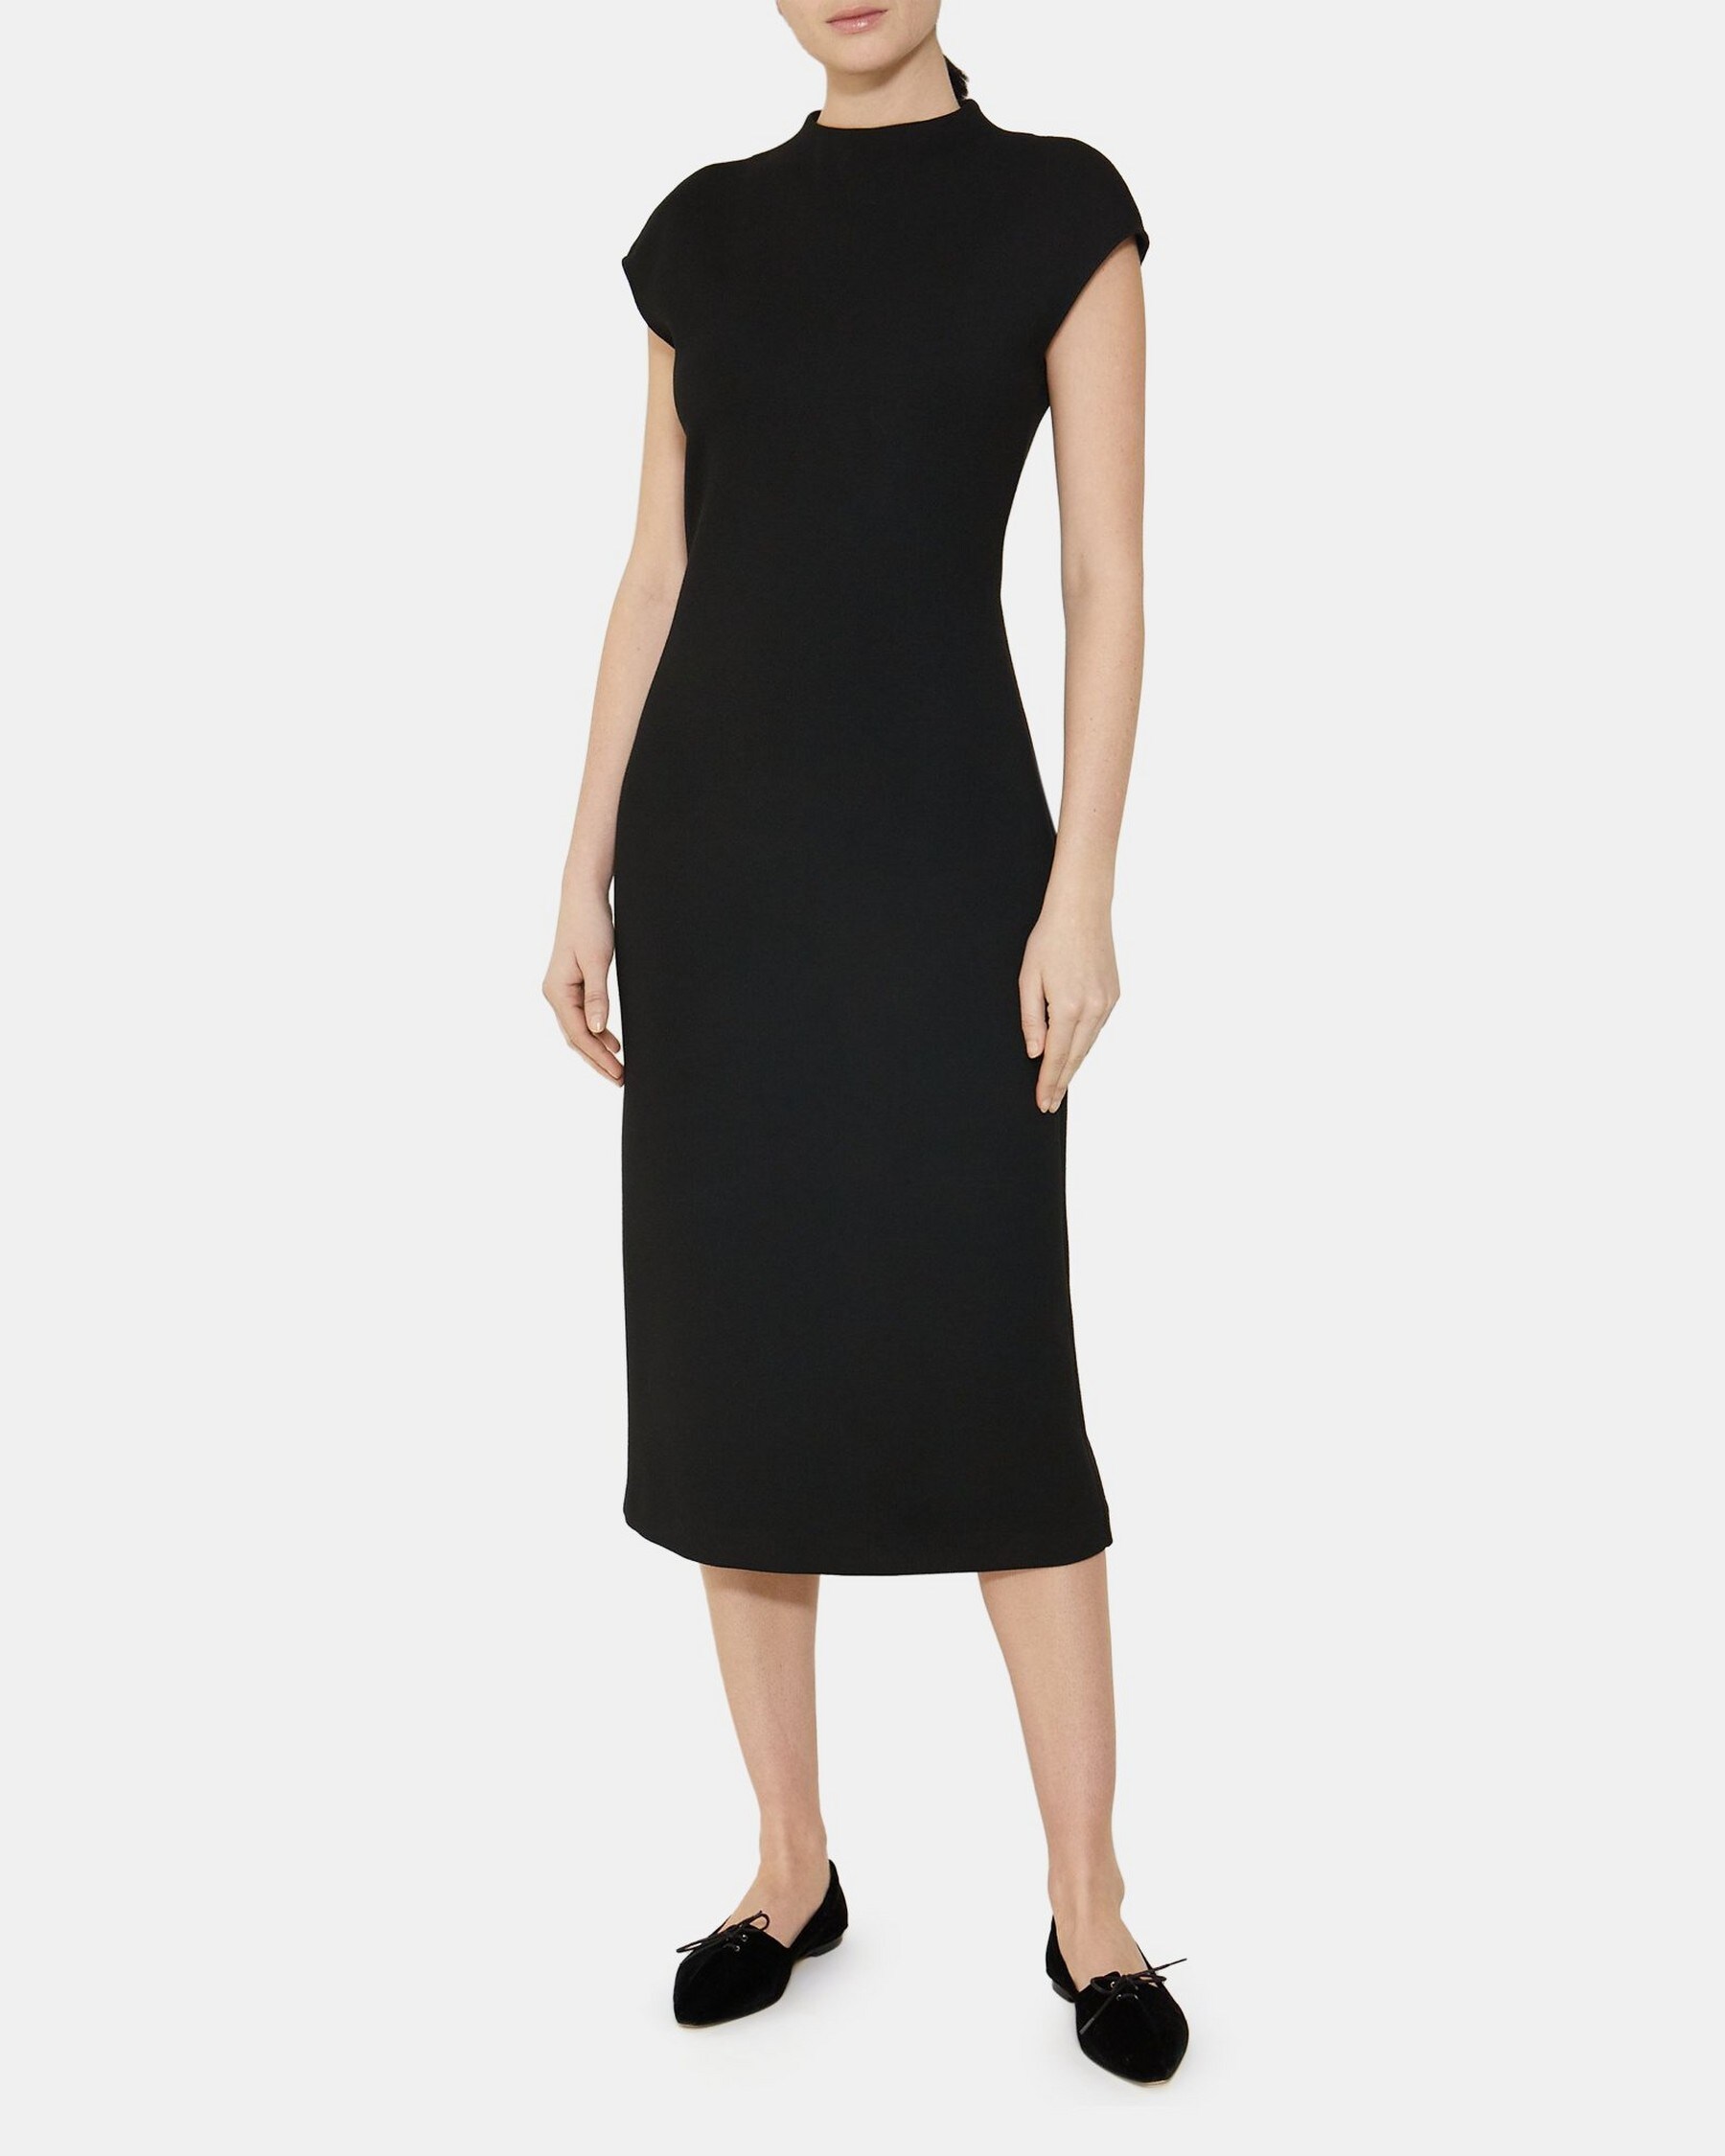 Theory High-Neck Dress in Double-Knit Jersey